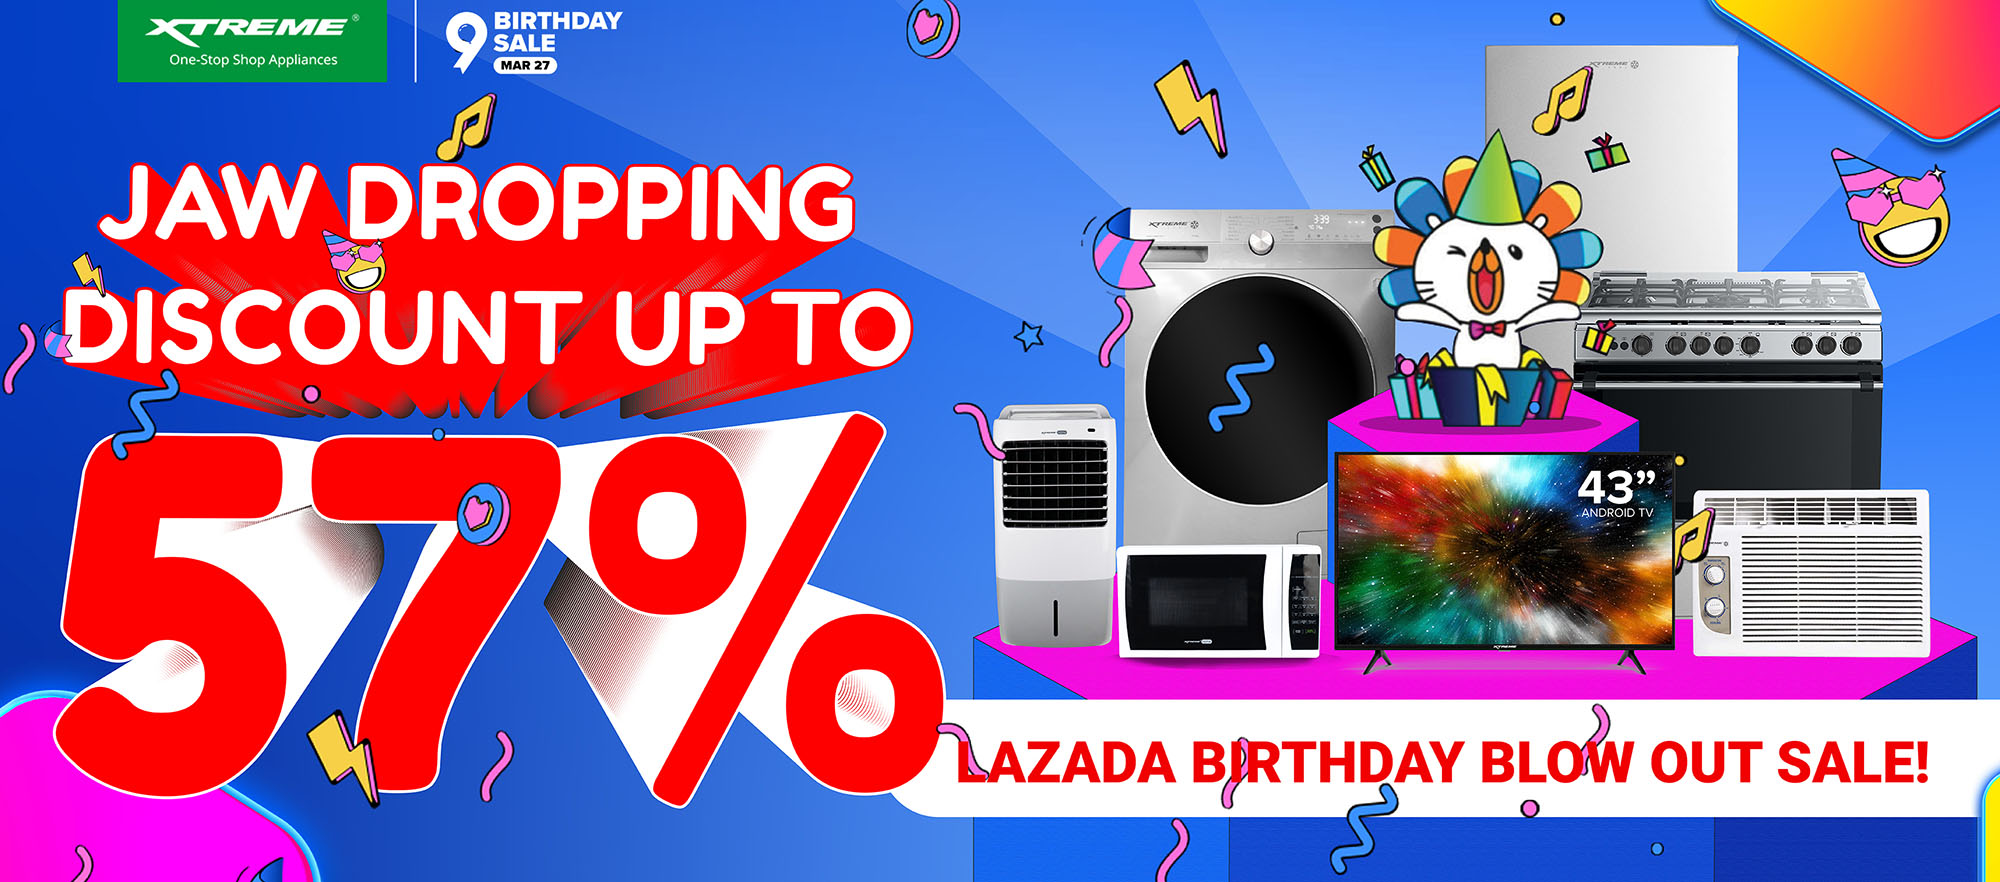 XTREME Appliances presents jaw-dropping discounts up to 57% this March 27!